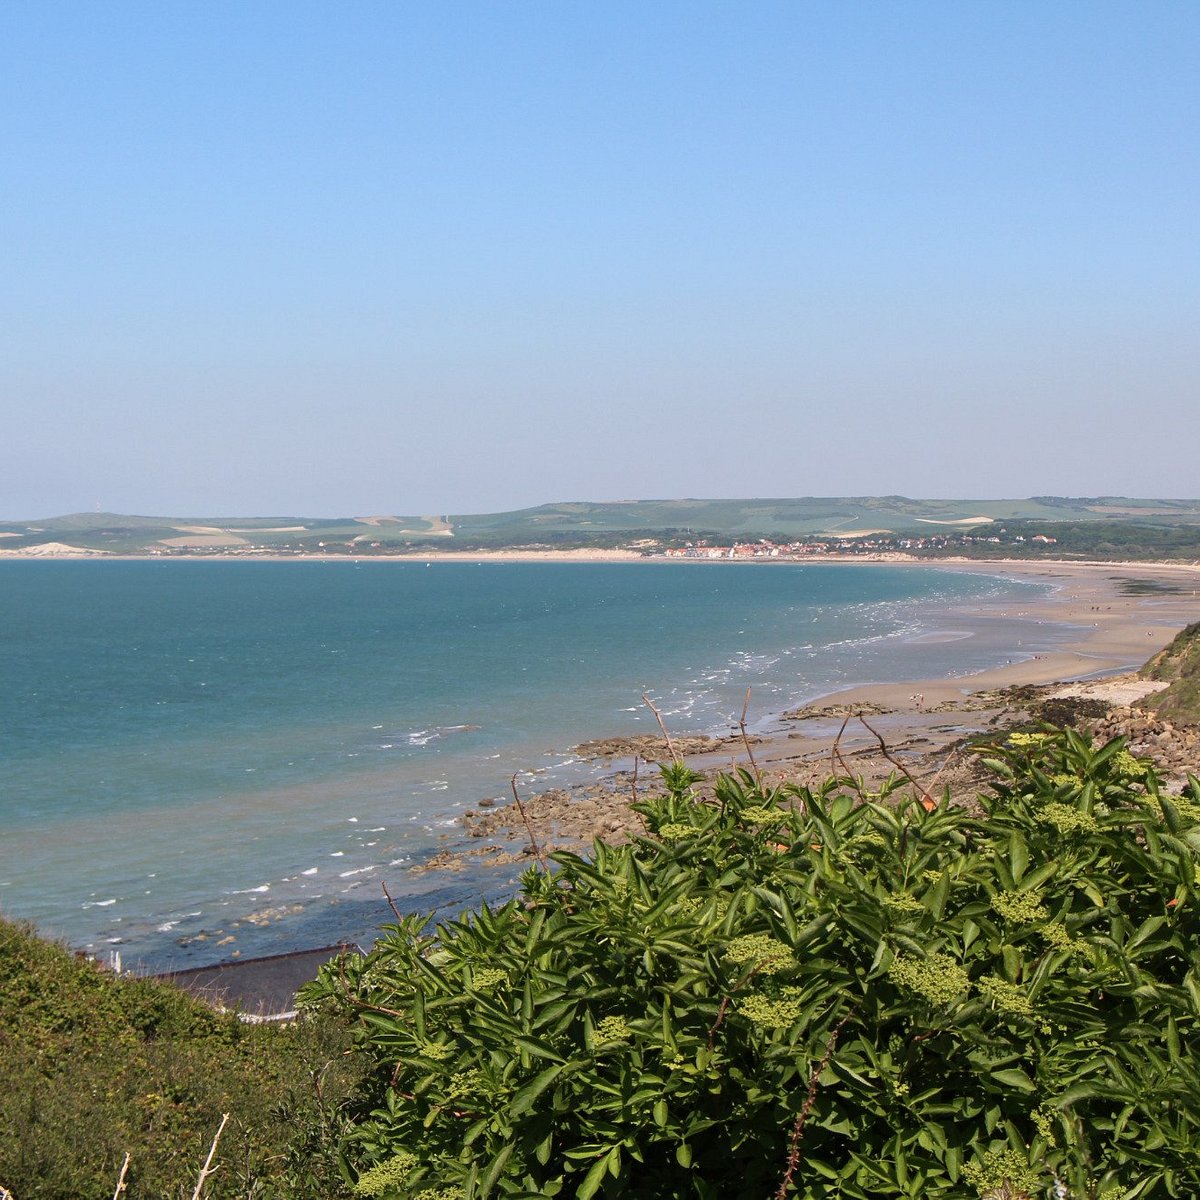  Wissant  strand - North 	Picardy